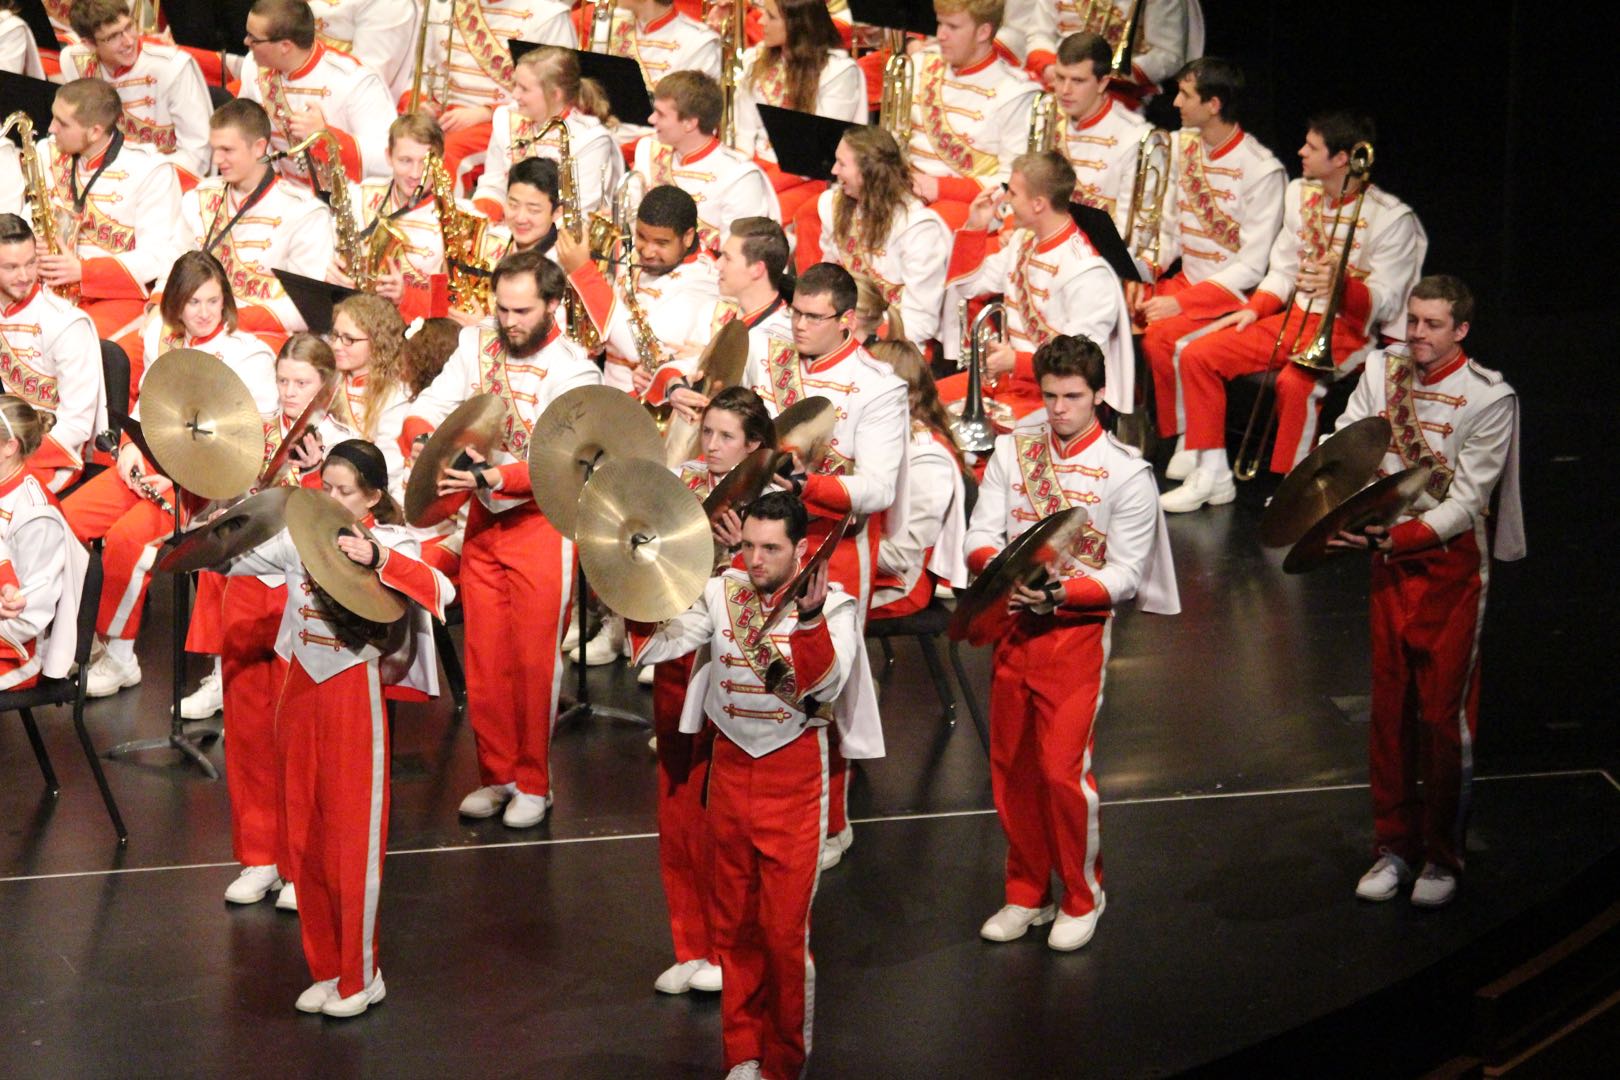 The Cornhusker Marching Band's Highlights Concert is Saturday, Dec. 9 in the Lied Center for Performing Arts.